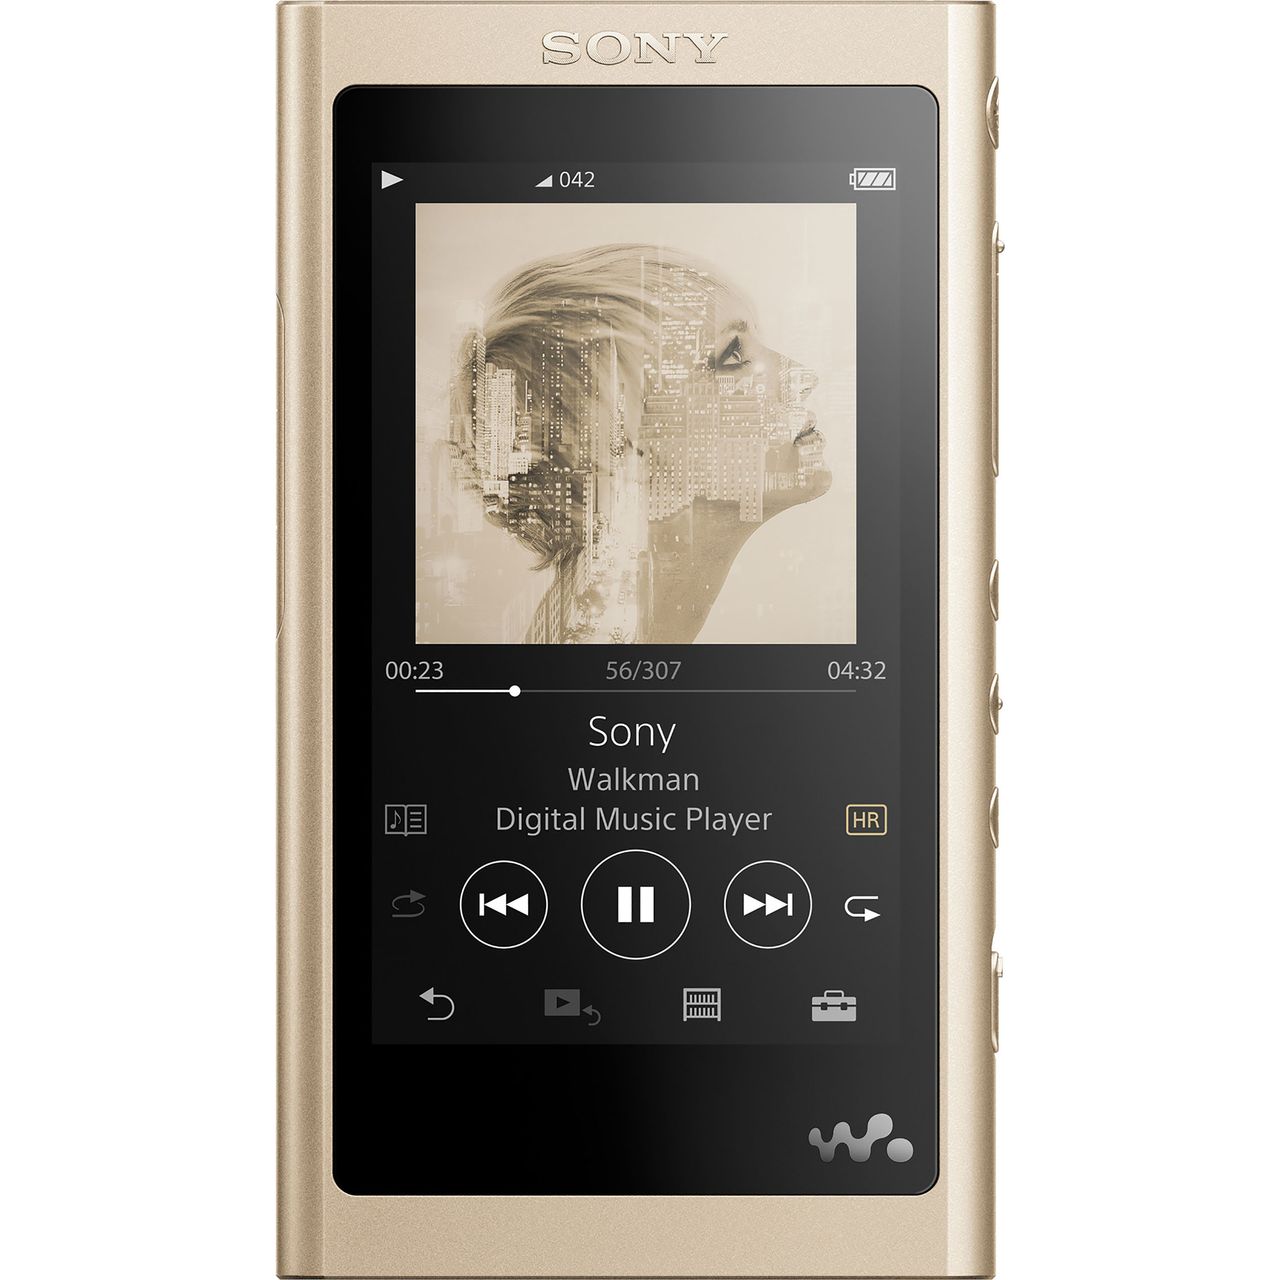 Sony A55 Walkman With Built-in USB Review